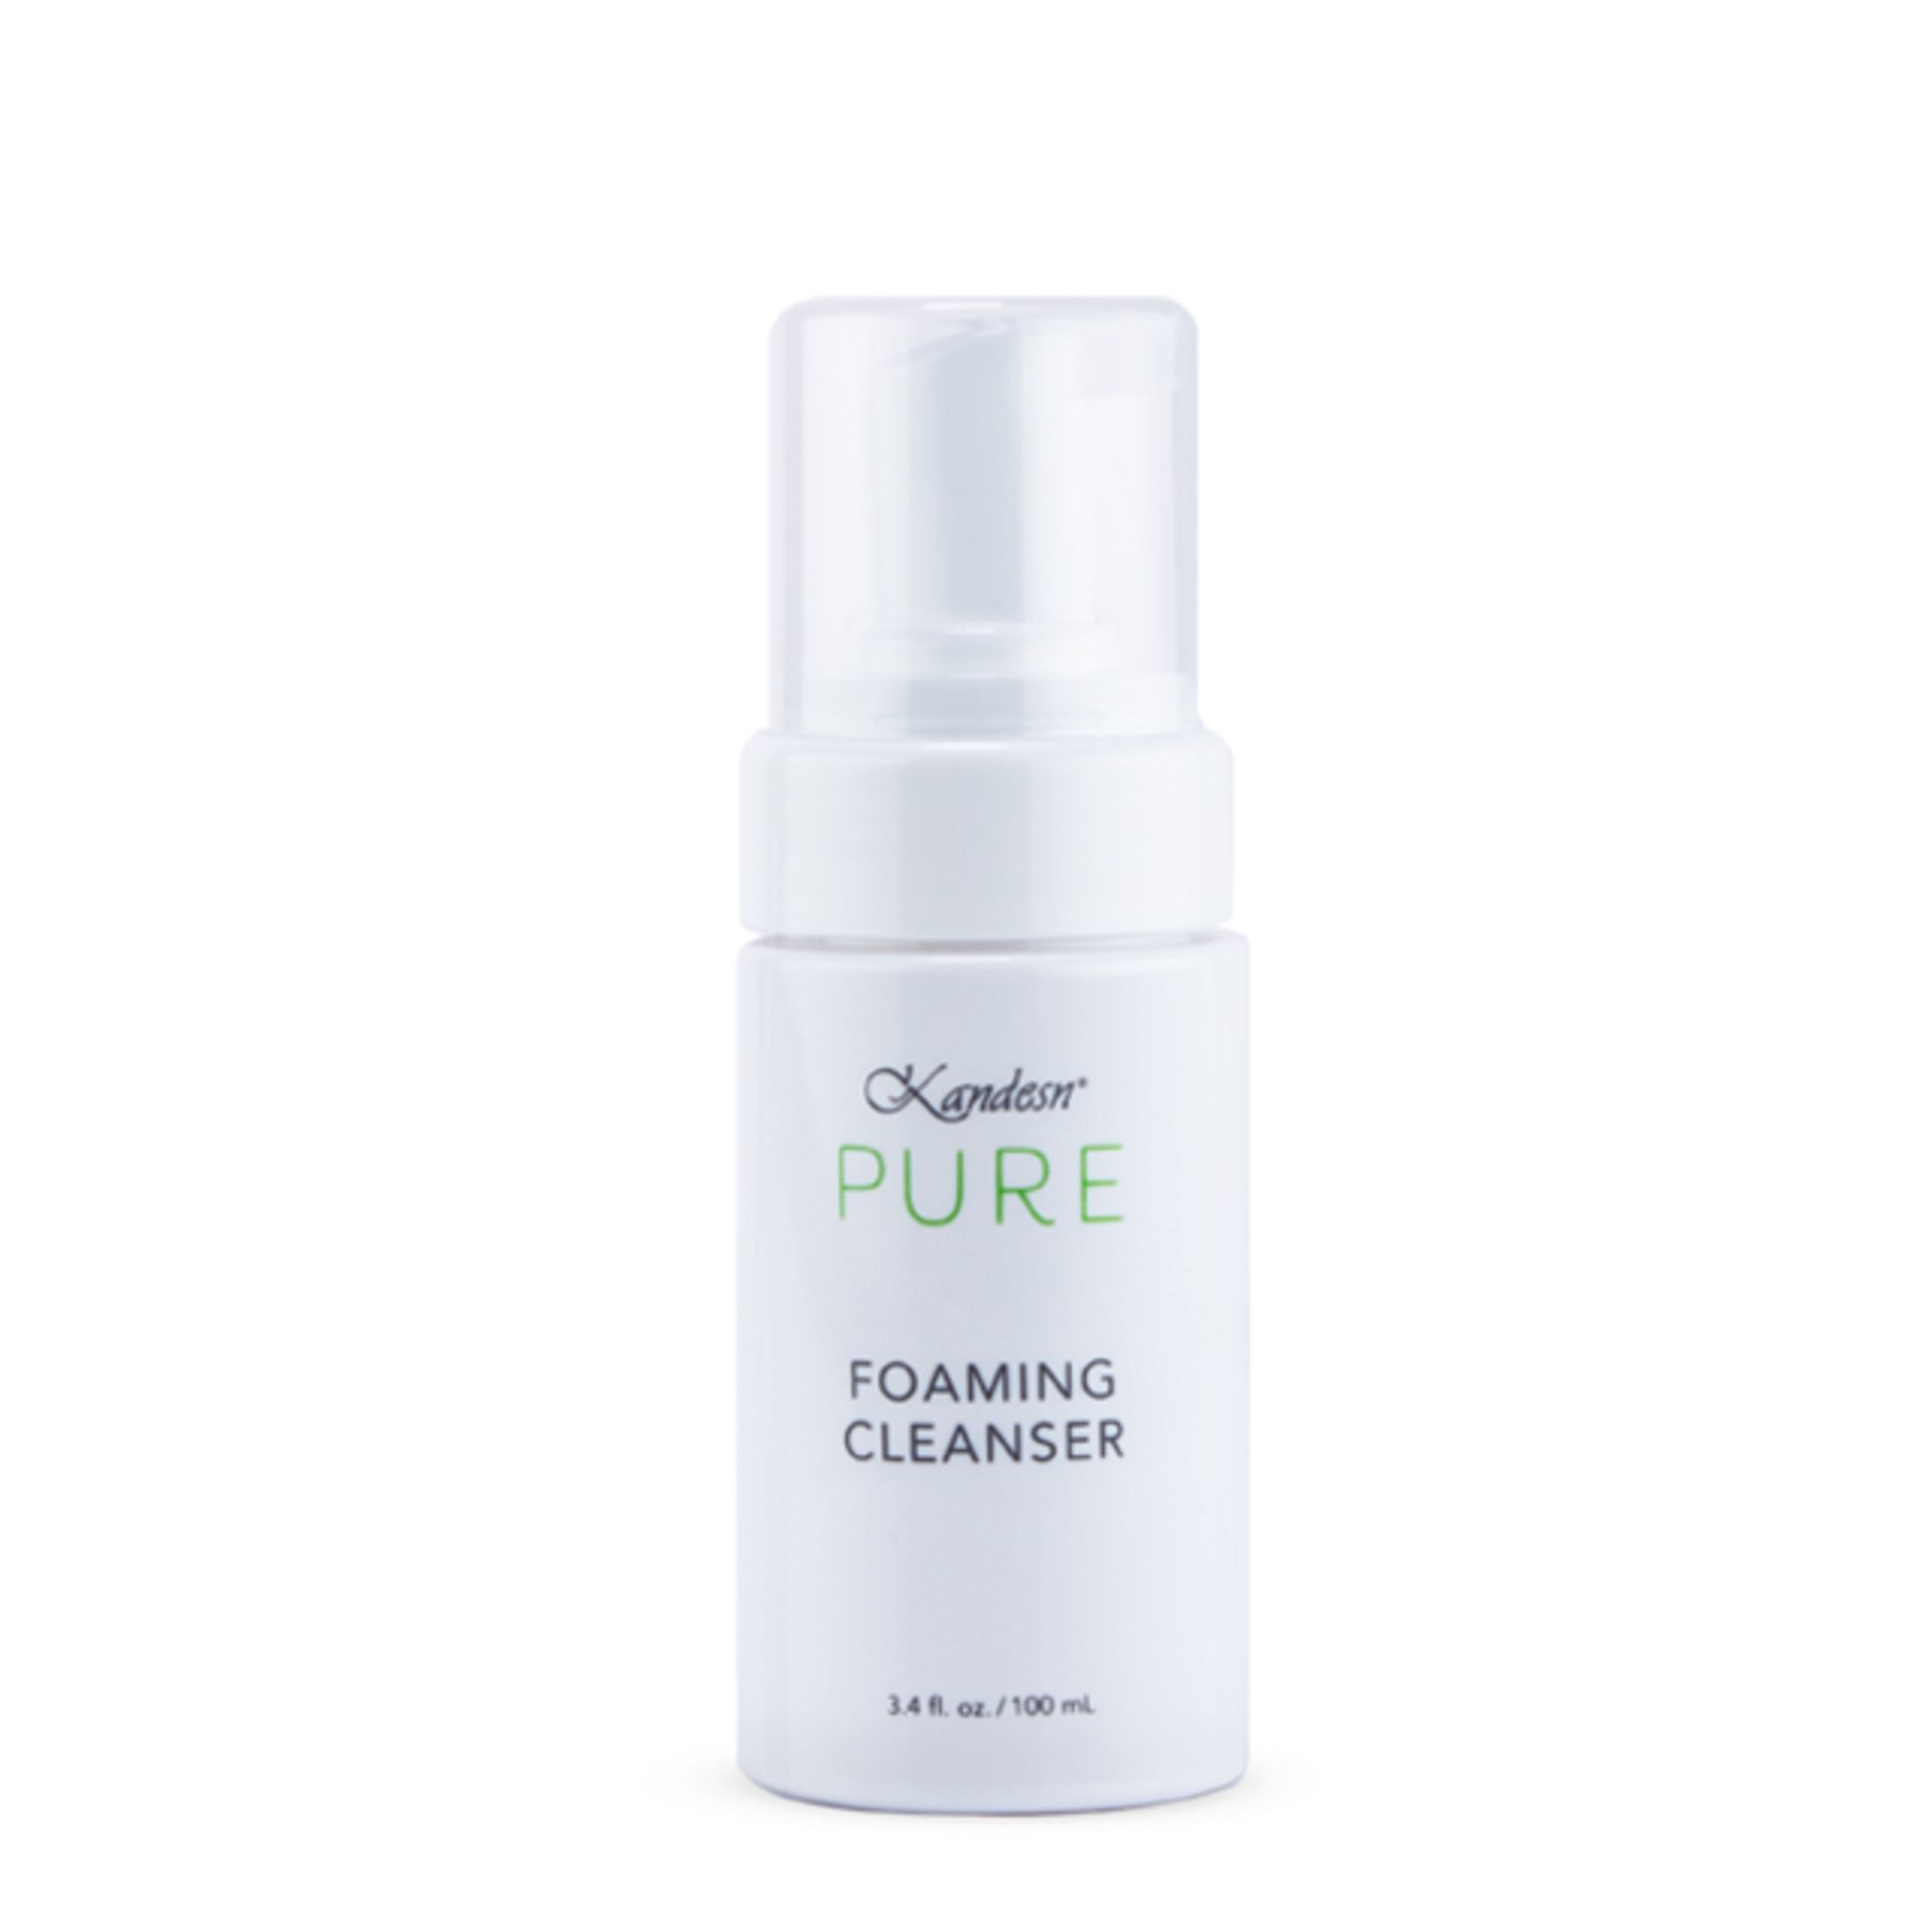 KANDESN® PURE FOAMING CLEANSER